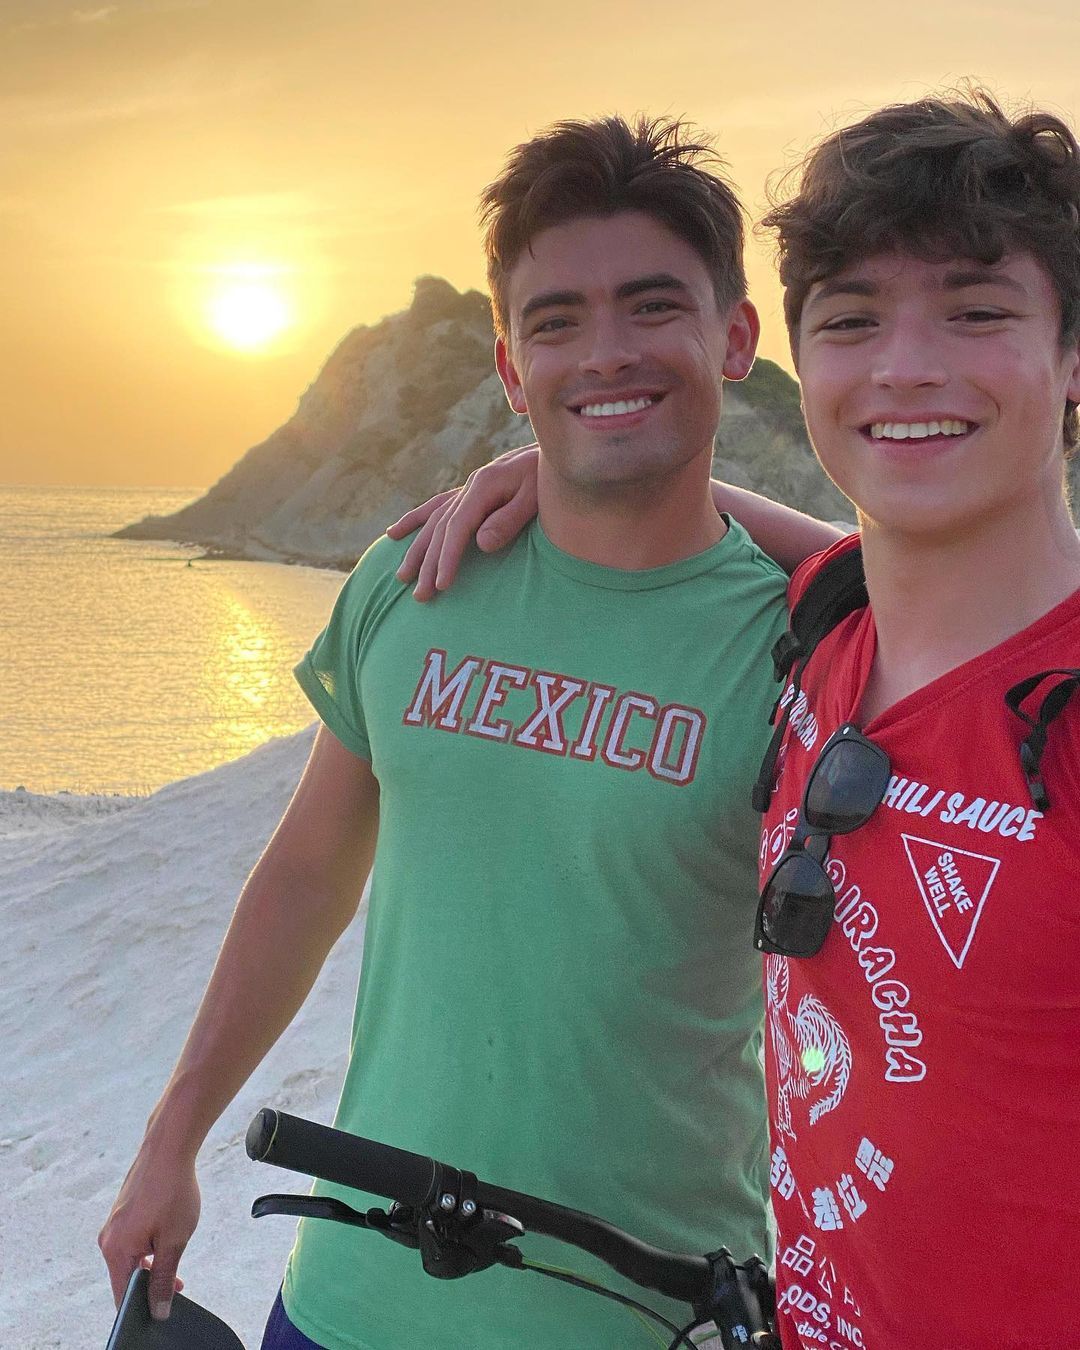 Kelly Ripa's sons, Michael and Joaquin, pose for a selfie at the beach.